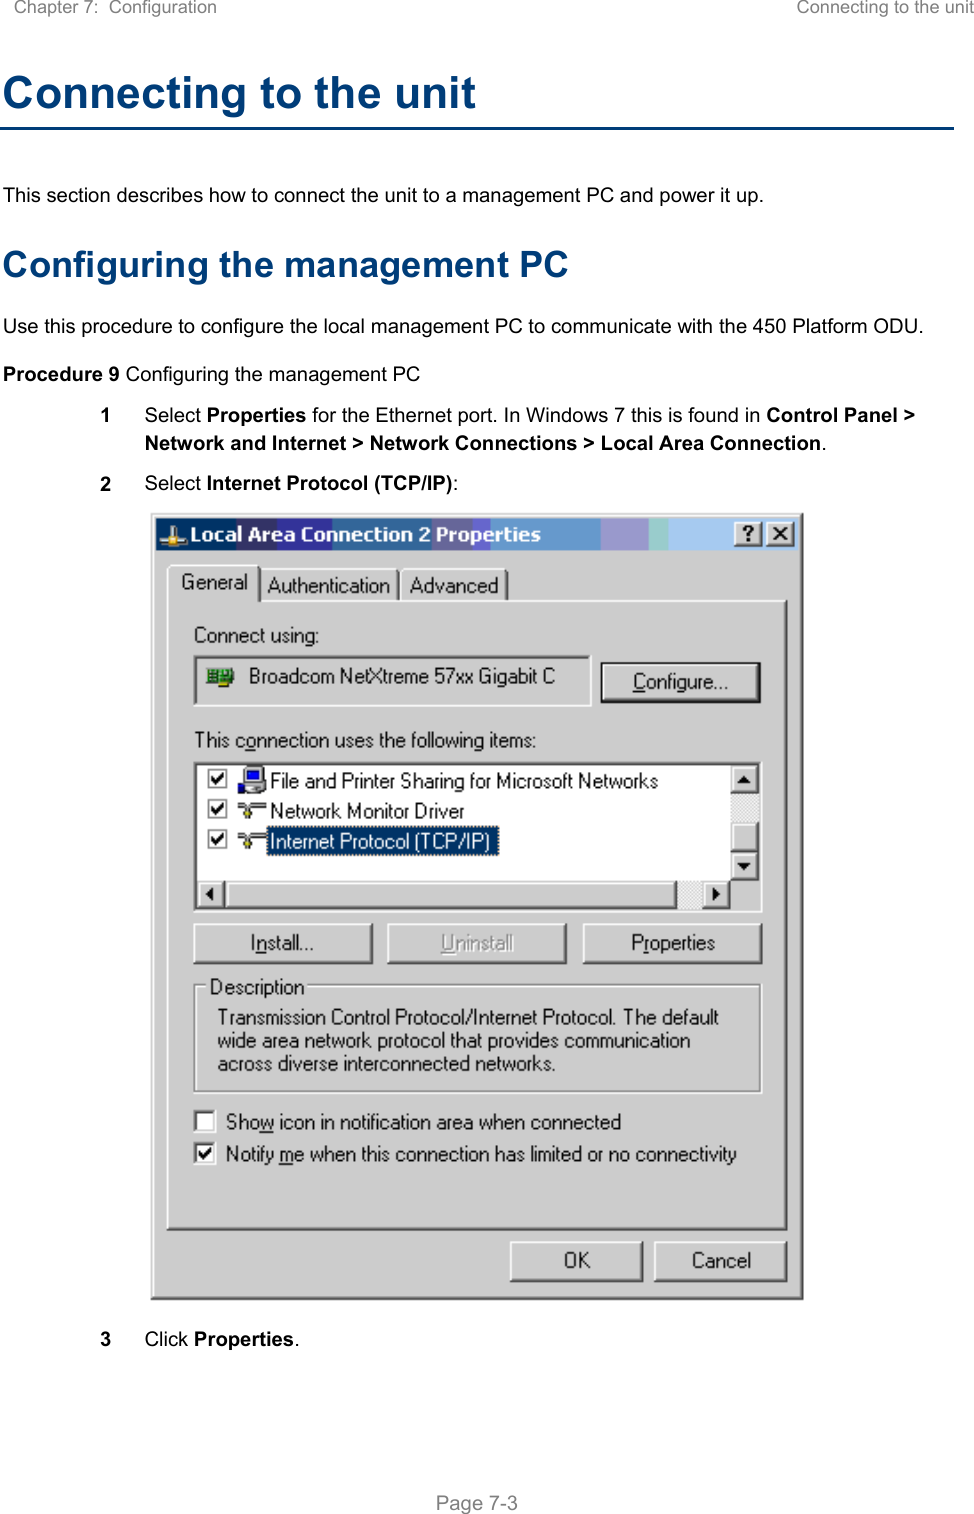 Chapter 7:  Configuration  Connecting to the unit   Page 7-3 Connecting to the unit This section describes how to connect the unit to a management PC and power it up. Configuring the management PC Use this procedure to configure the local management PC to communicate with the 450 Platform ODU. Procedure 9 Configuring the management PC 1  Select Properties for the Ethernet port. In Windows 7 this is found in Control Panel &gt; Network and Internet &gt; Network Connections &gt; Local Area Connection. 2  Select Internet Protocol (TCP/IP):  3  Click Properties. 